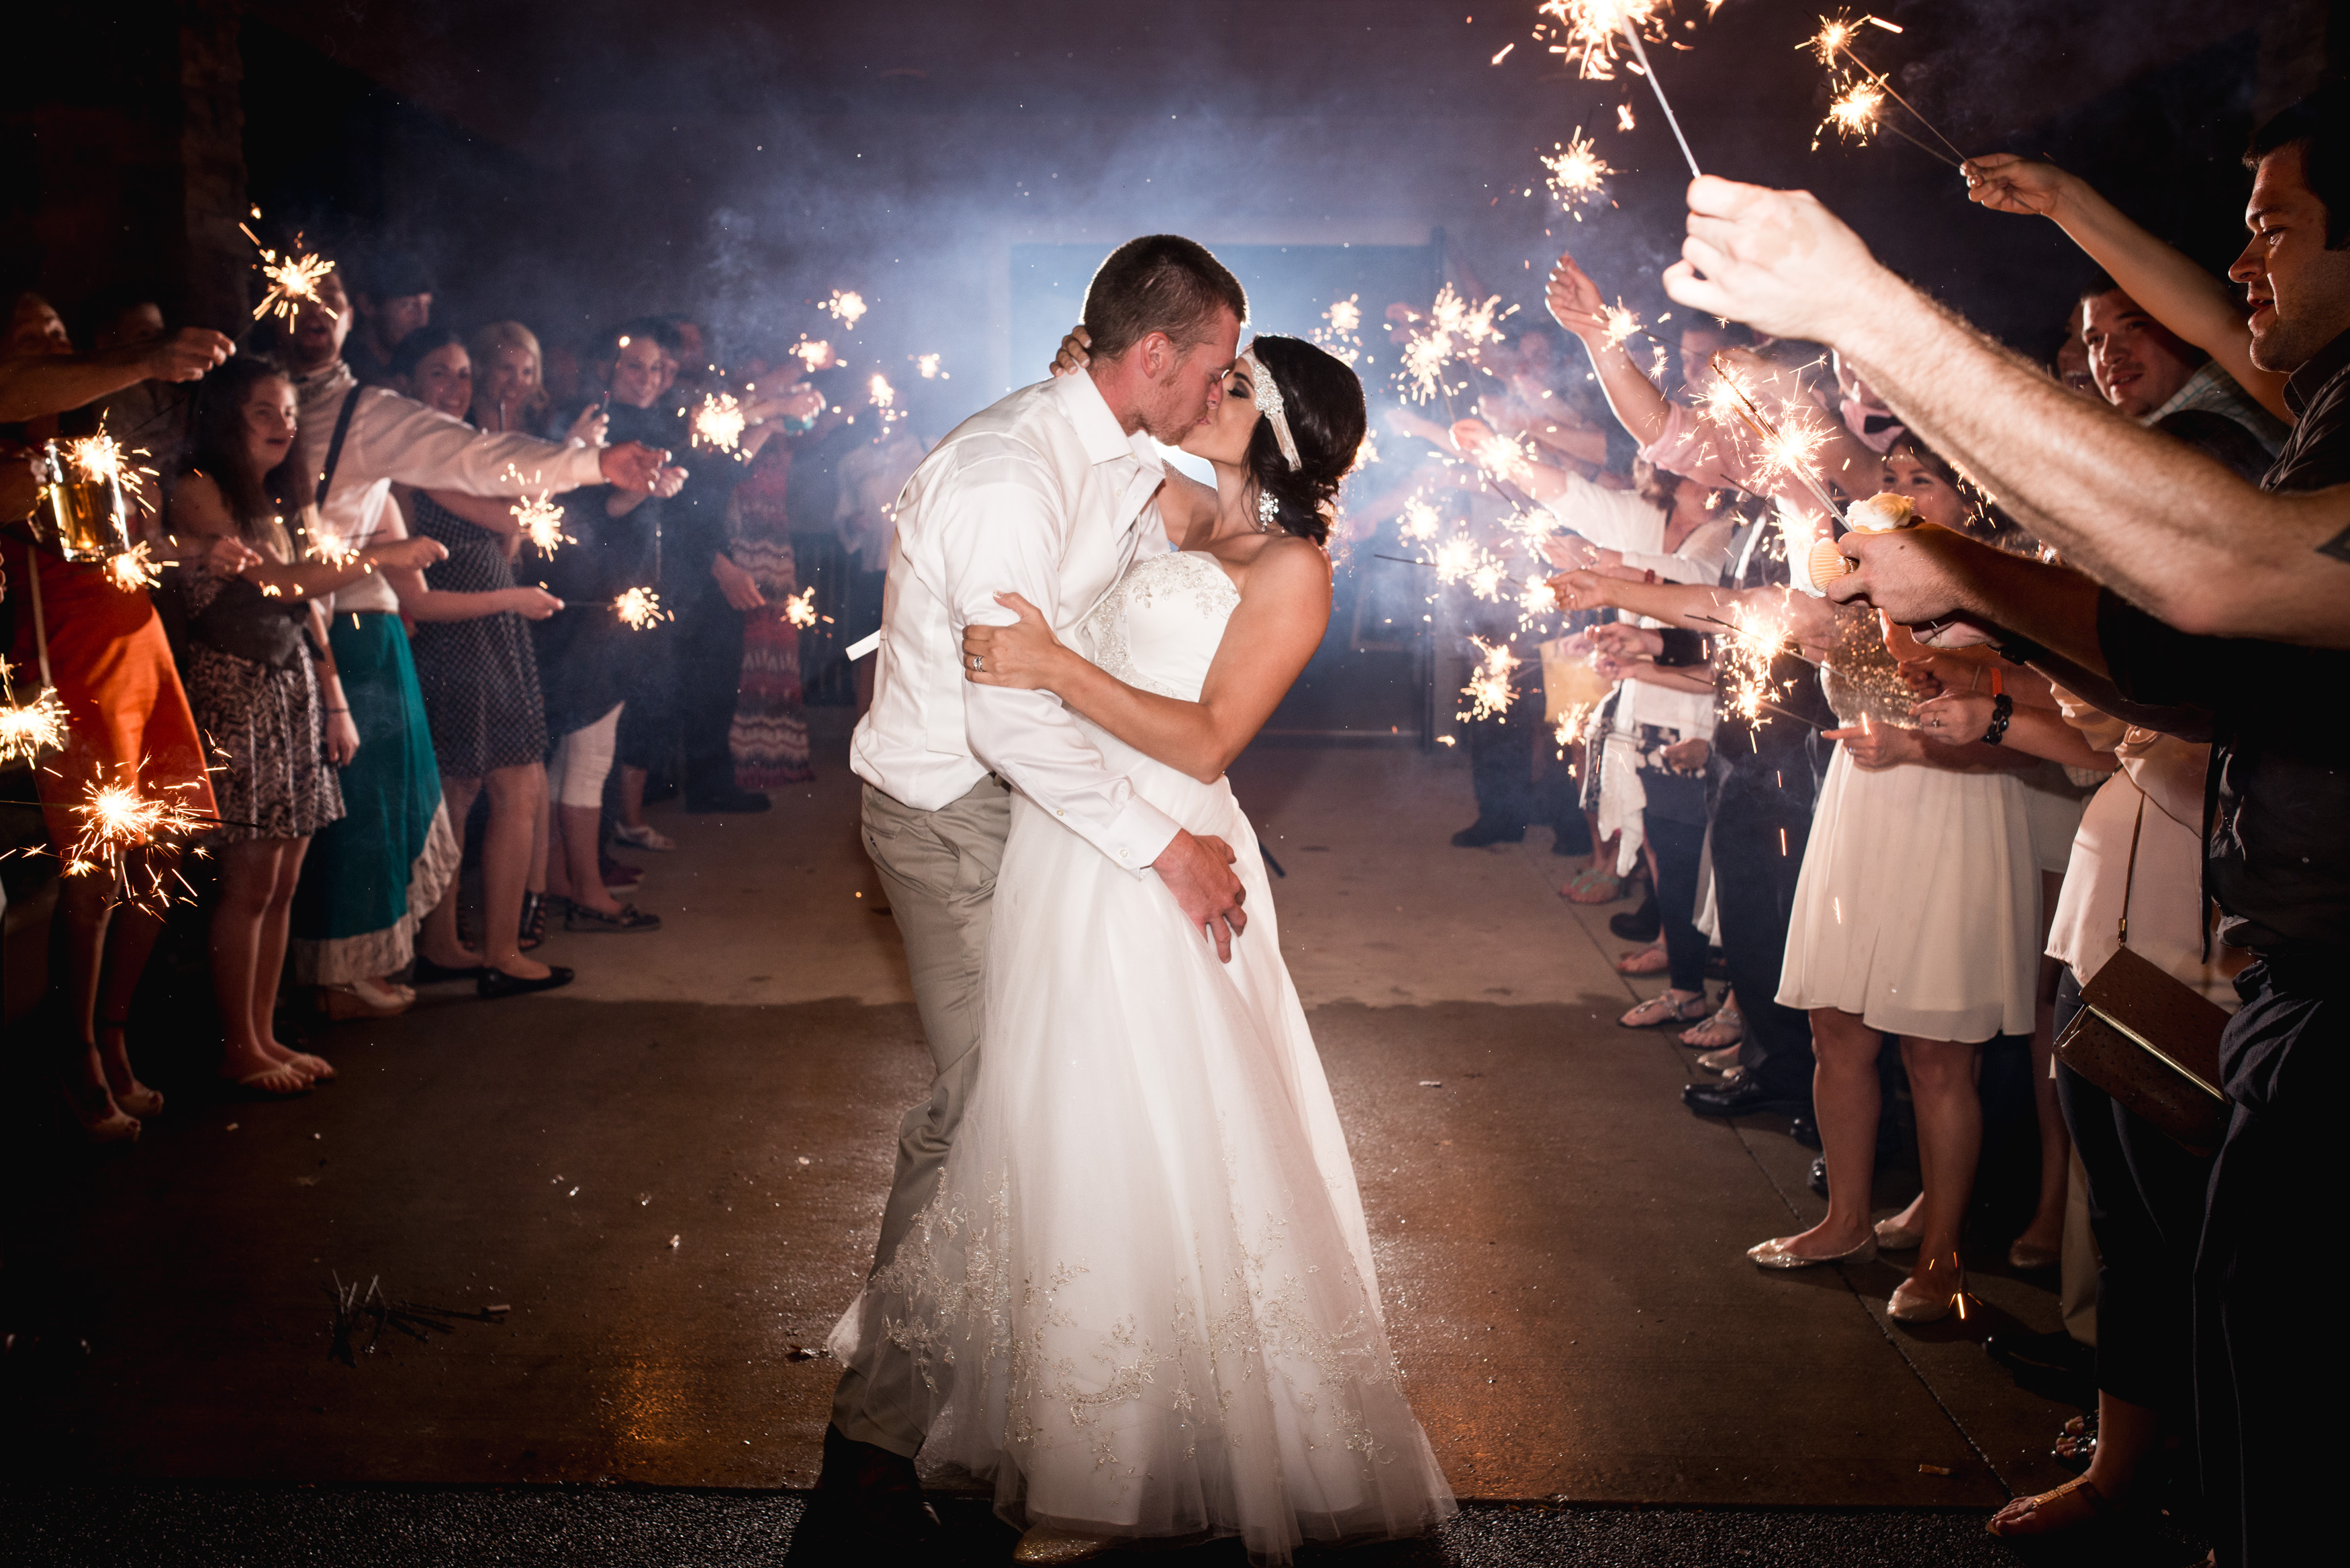 Jessica + Russell | Married | 06.21.2014